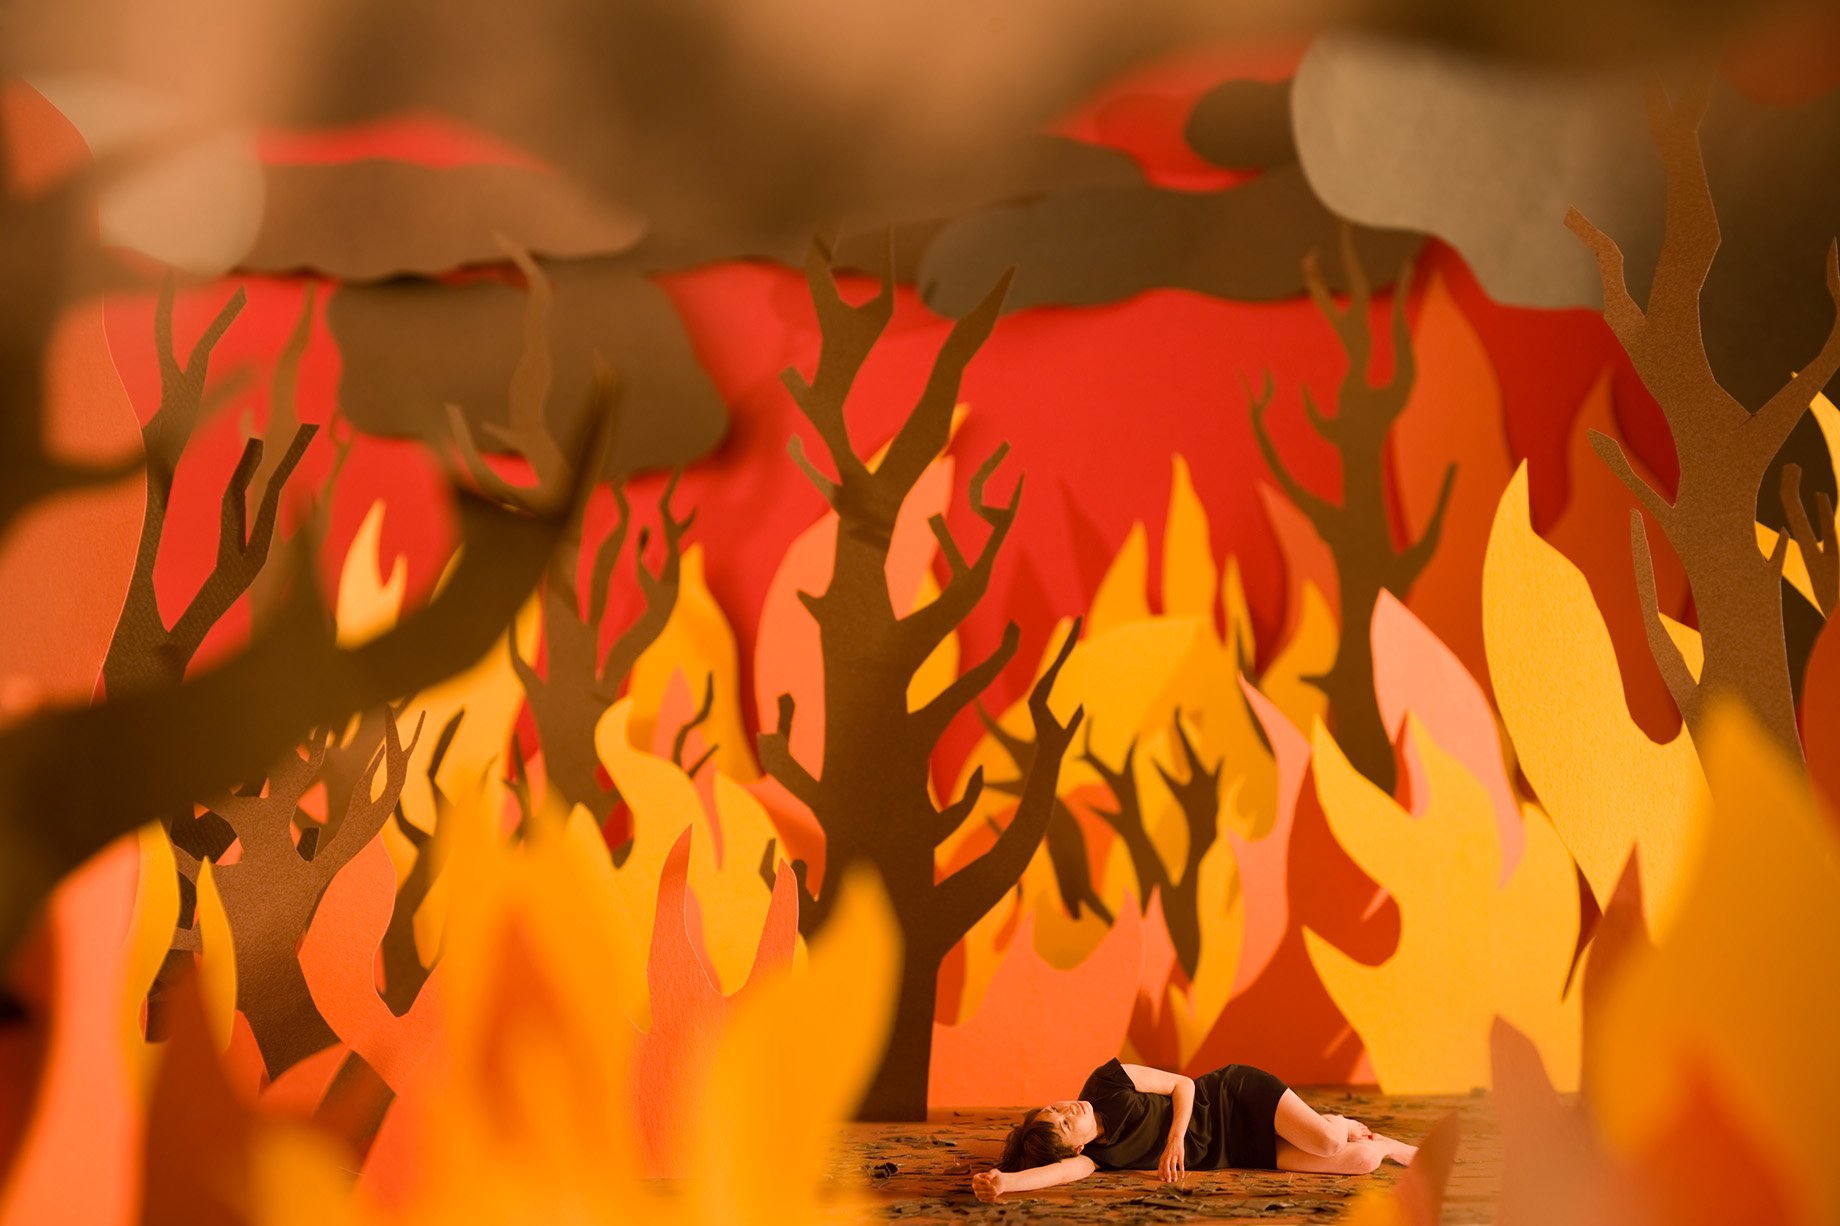 Woman lying amid wildfires constructed from color paper shot by Patrick Heageny for Paper Thin